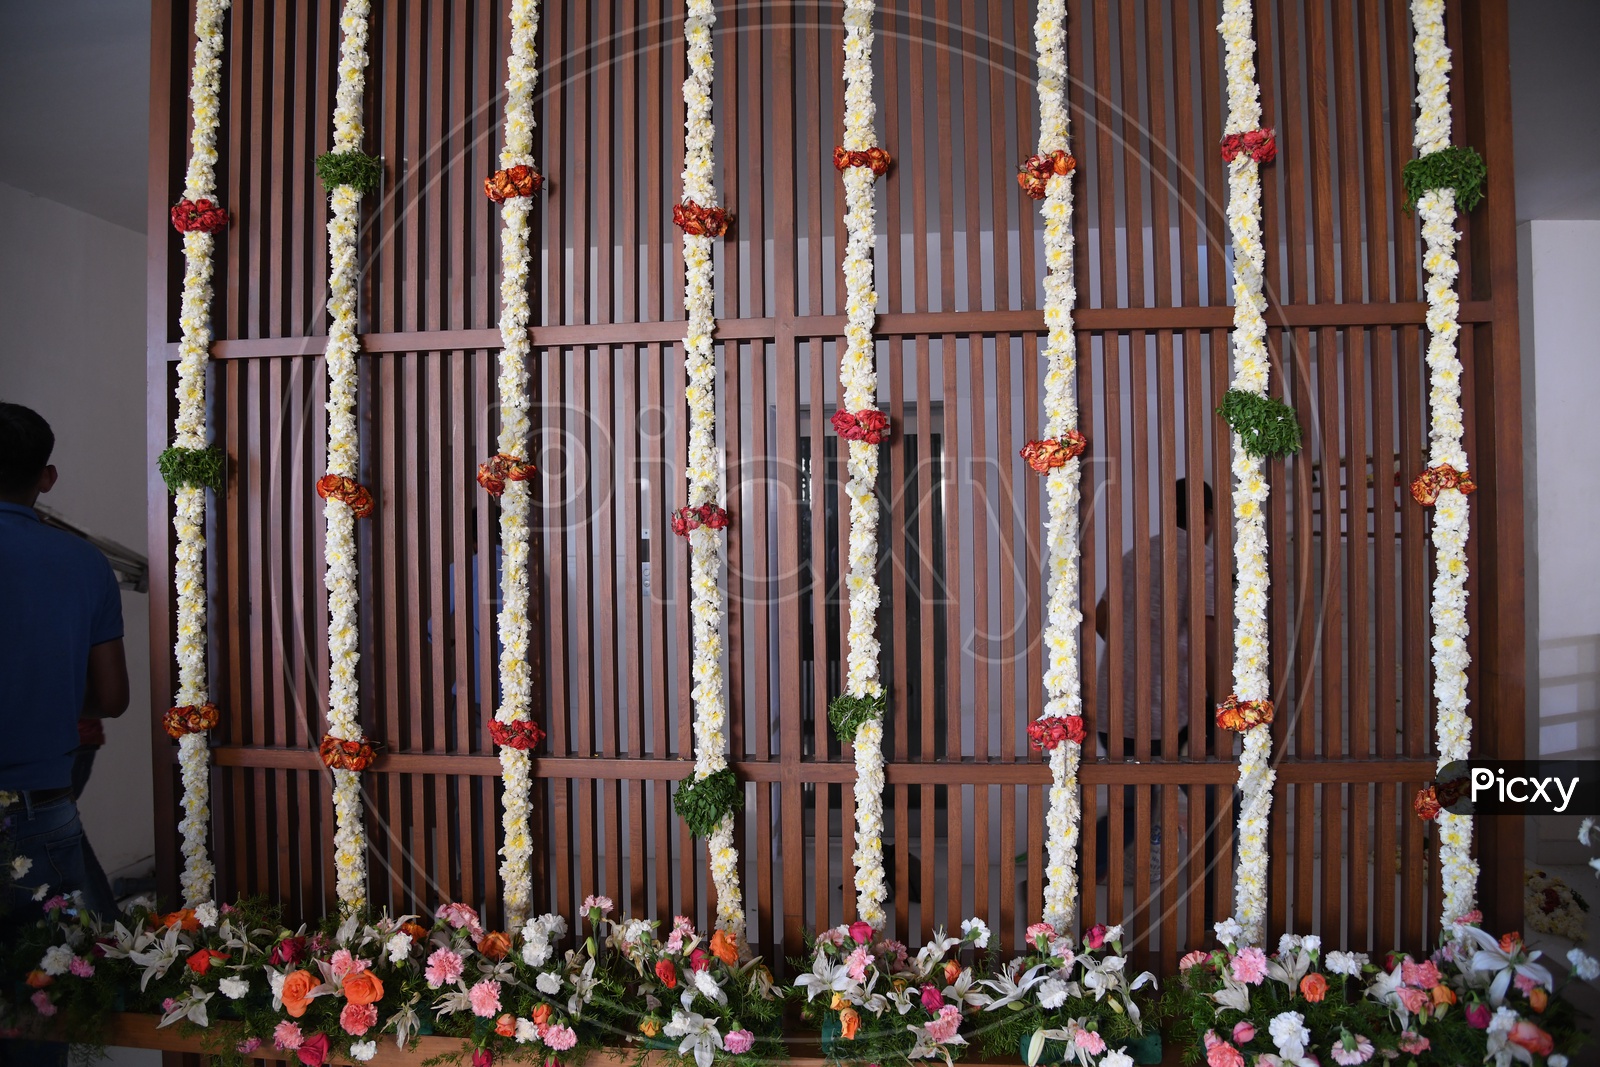 Flower Decoration In an House Interior Walls